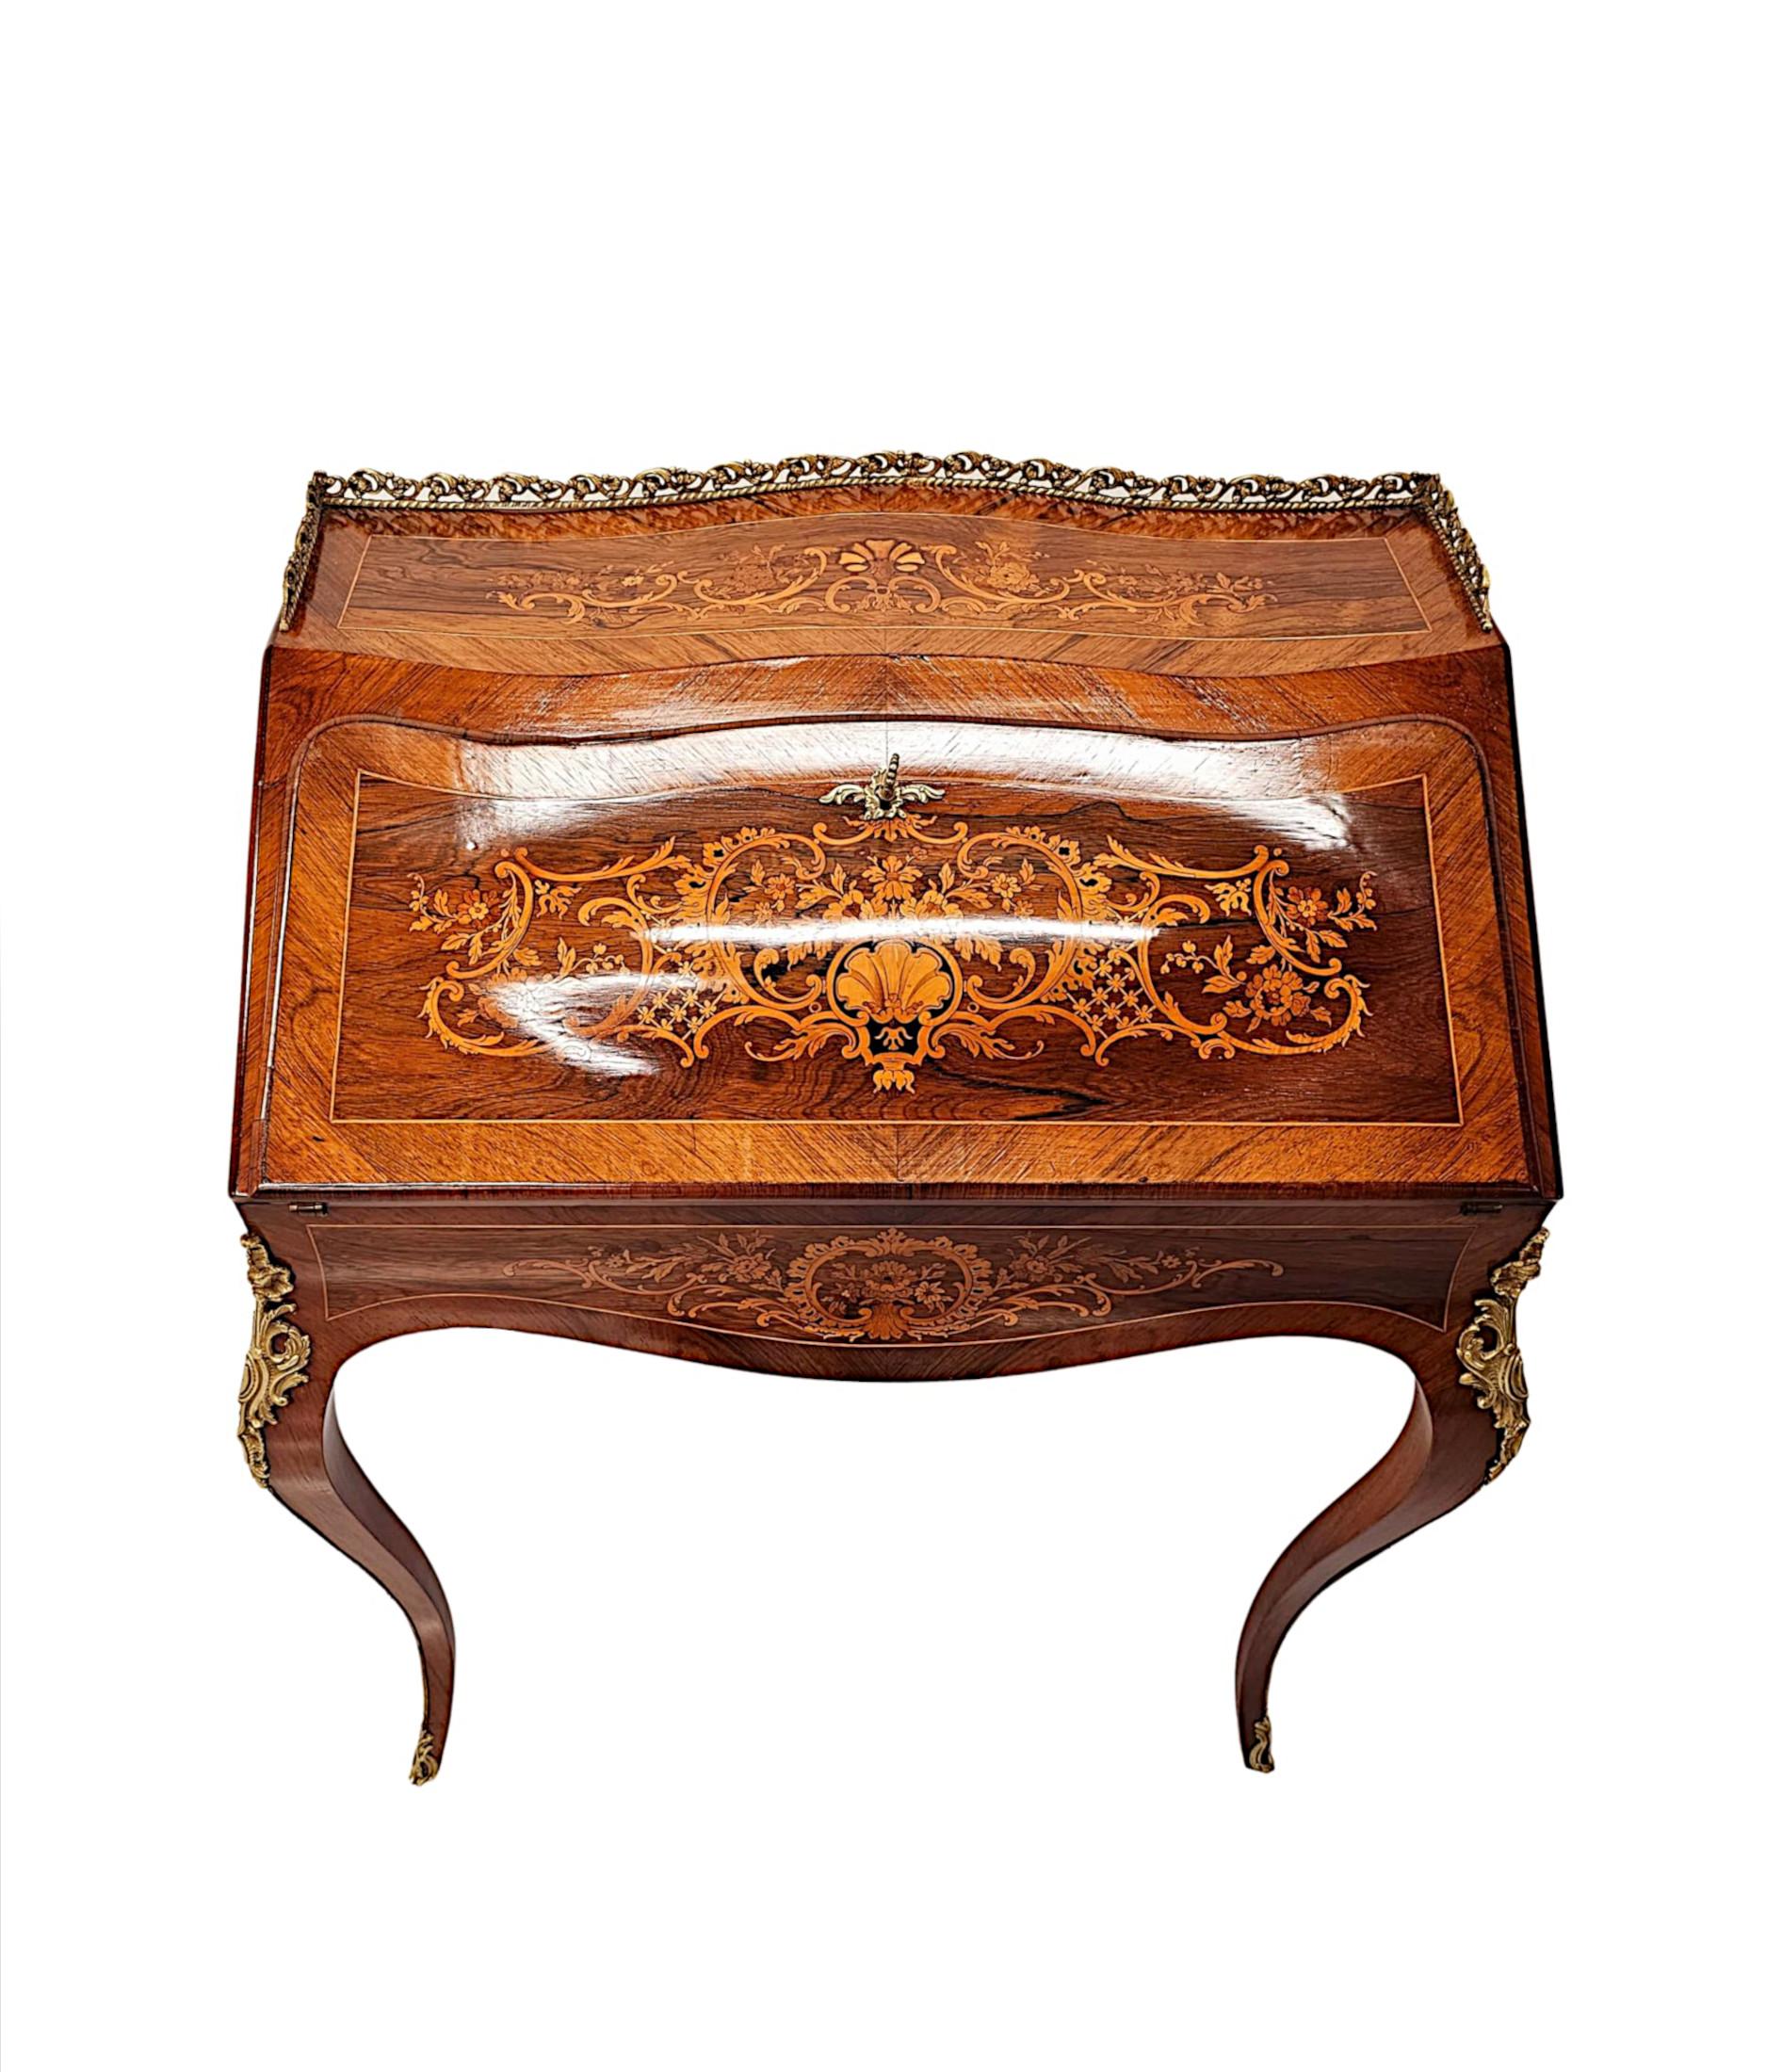 English A Very Fine 19th Century Marquetry Inlaid Bureau Du Dame For Sale